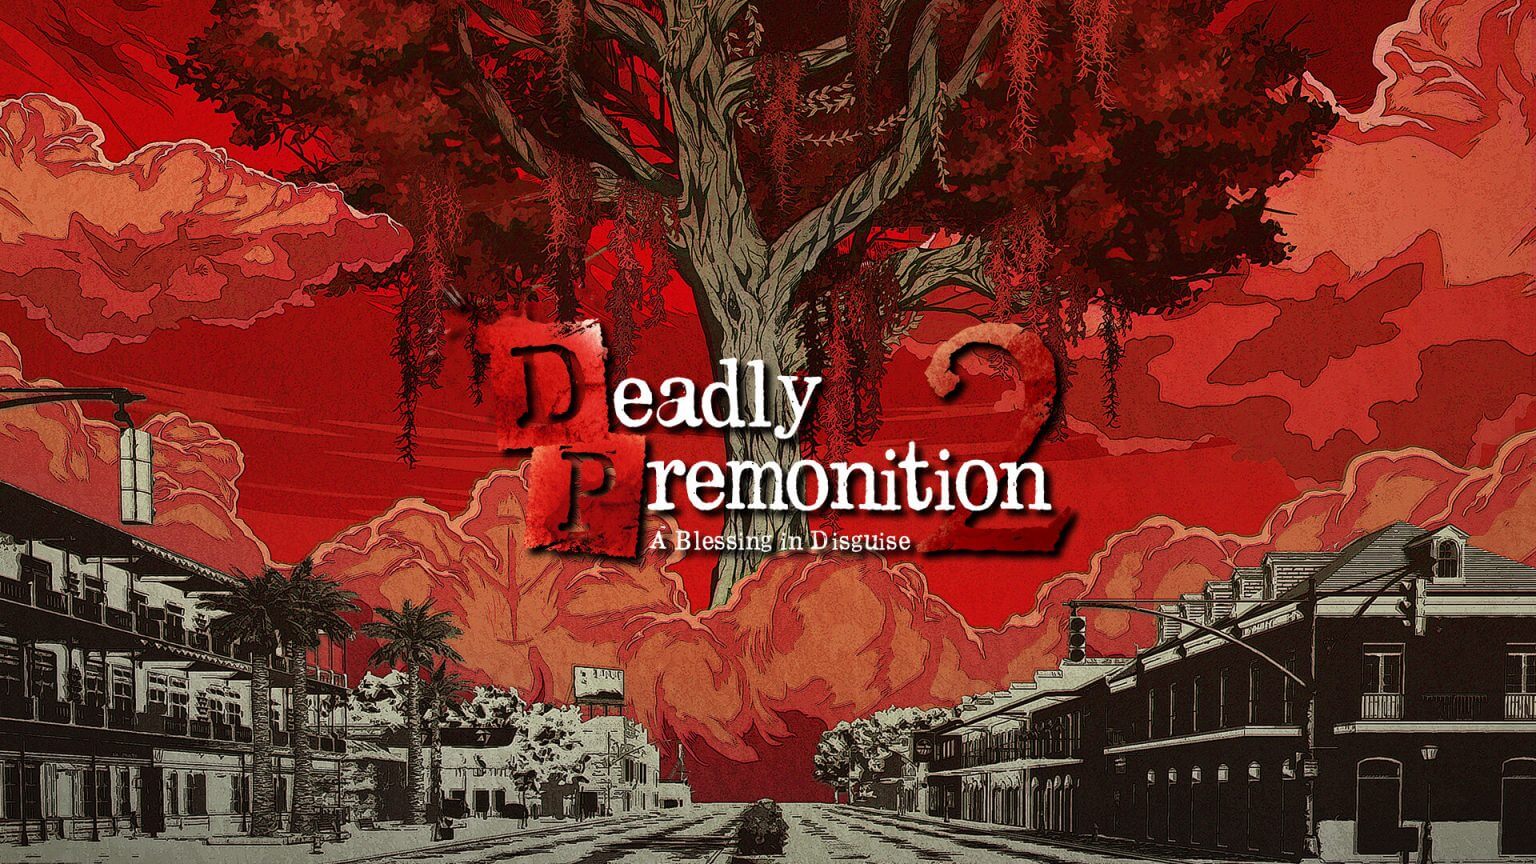 deadly premonition 2 a blessing in disguise steam download free